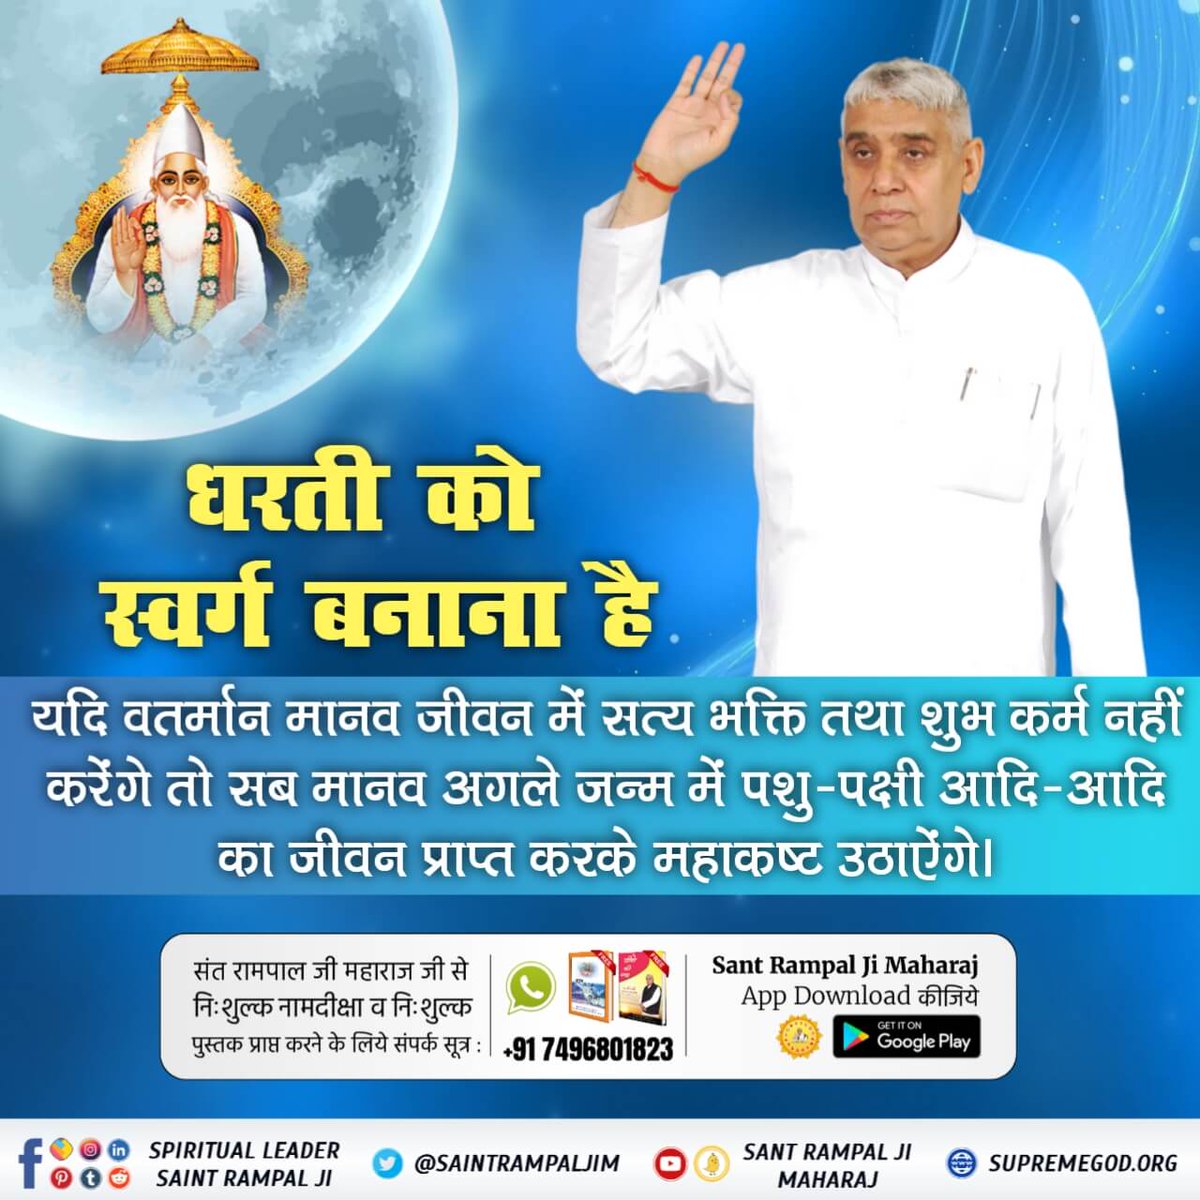 #धरती_को_स्वर्ग_बनाना_है
Saint Rampal Ji Maharaj has brought many positive changes in the society through His teachings. His followers are not involved in any illegal activities nor do they indulge in drugs or other intoxicants.